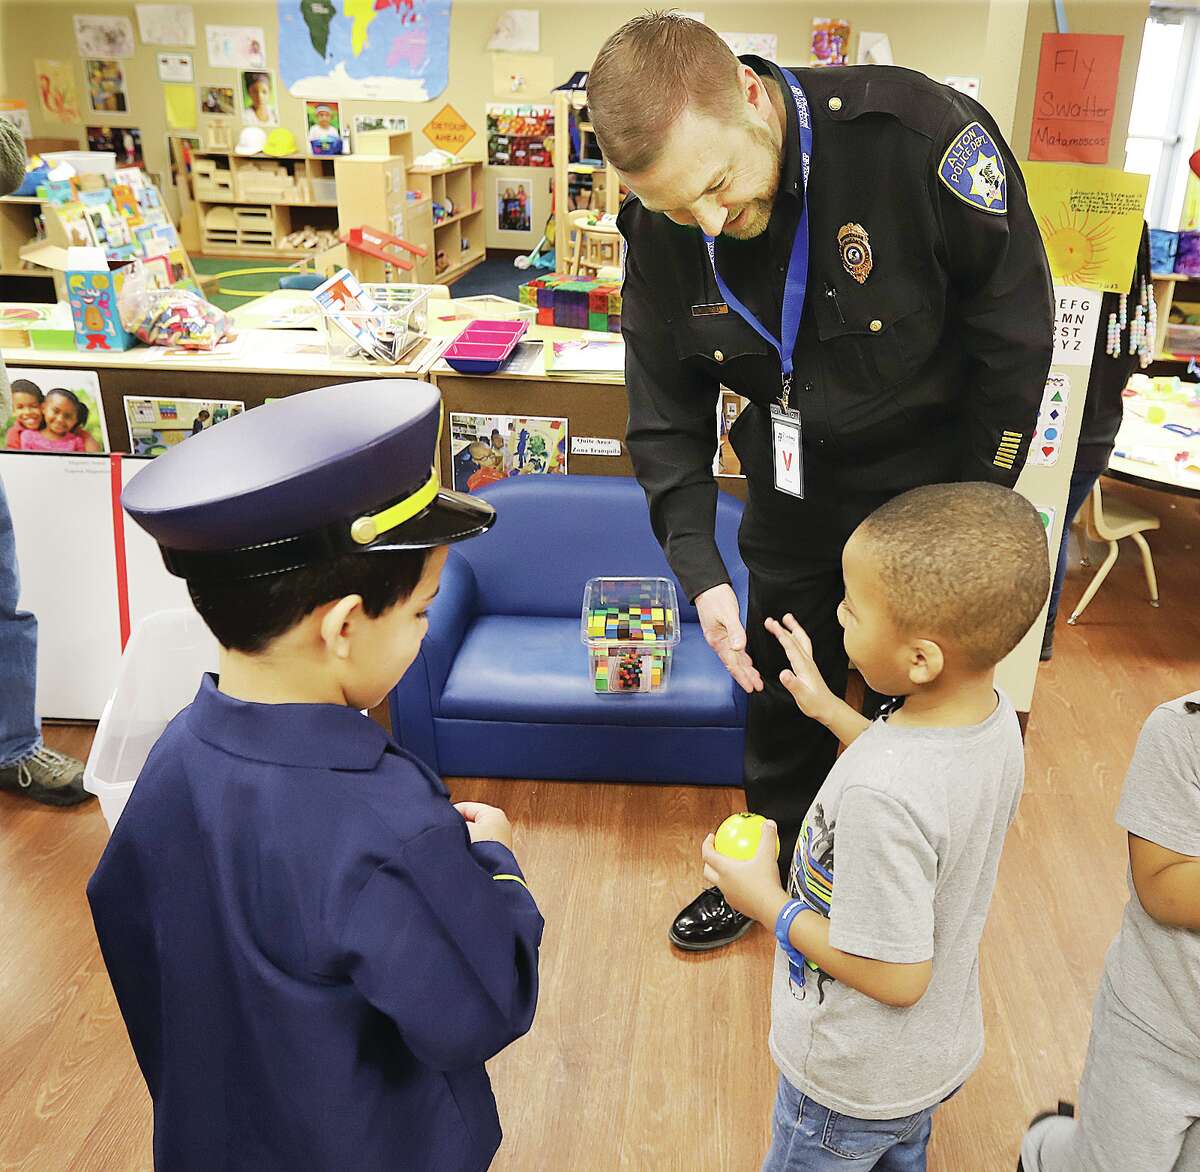 John Badman|The Telegraph Alton Police Lt. Michael O'Neill interacts with students Tuesday at the Riverbend Head Start's Esic Robinson facility in Alton.